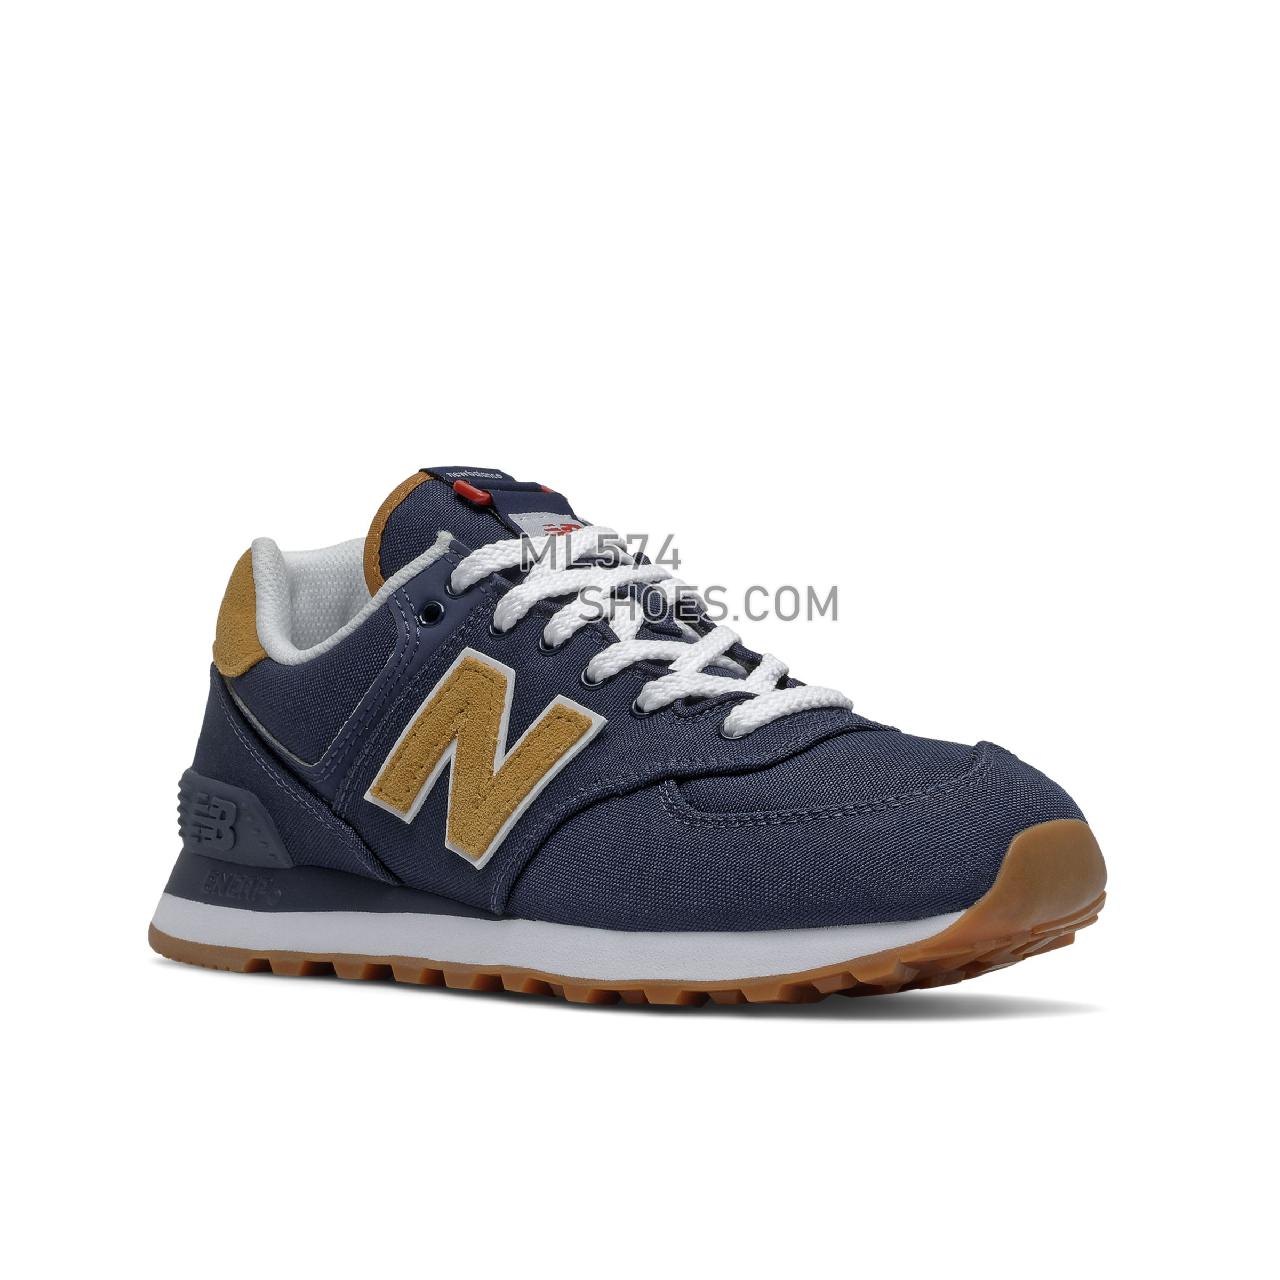 New Balance 574 - Women's Classic Sneakers - Natural Indigo with Workwear - WL574BP2